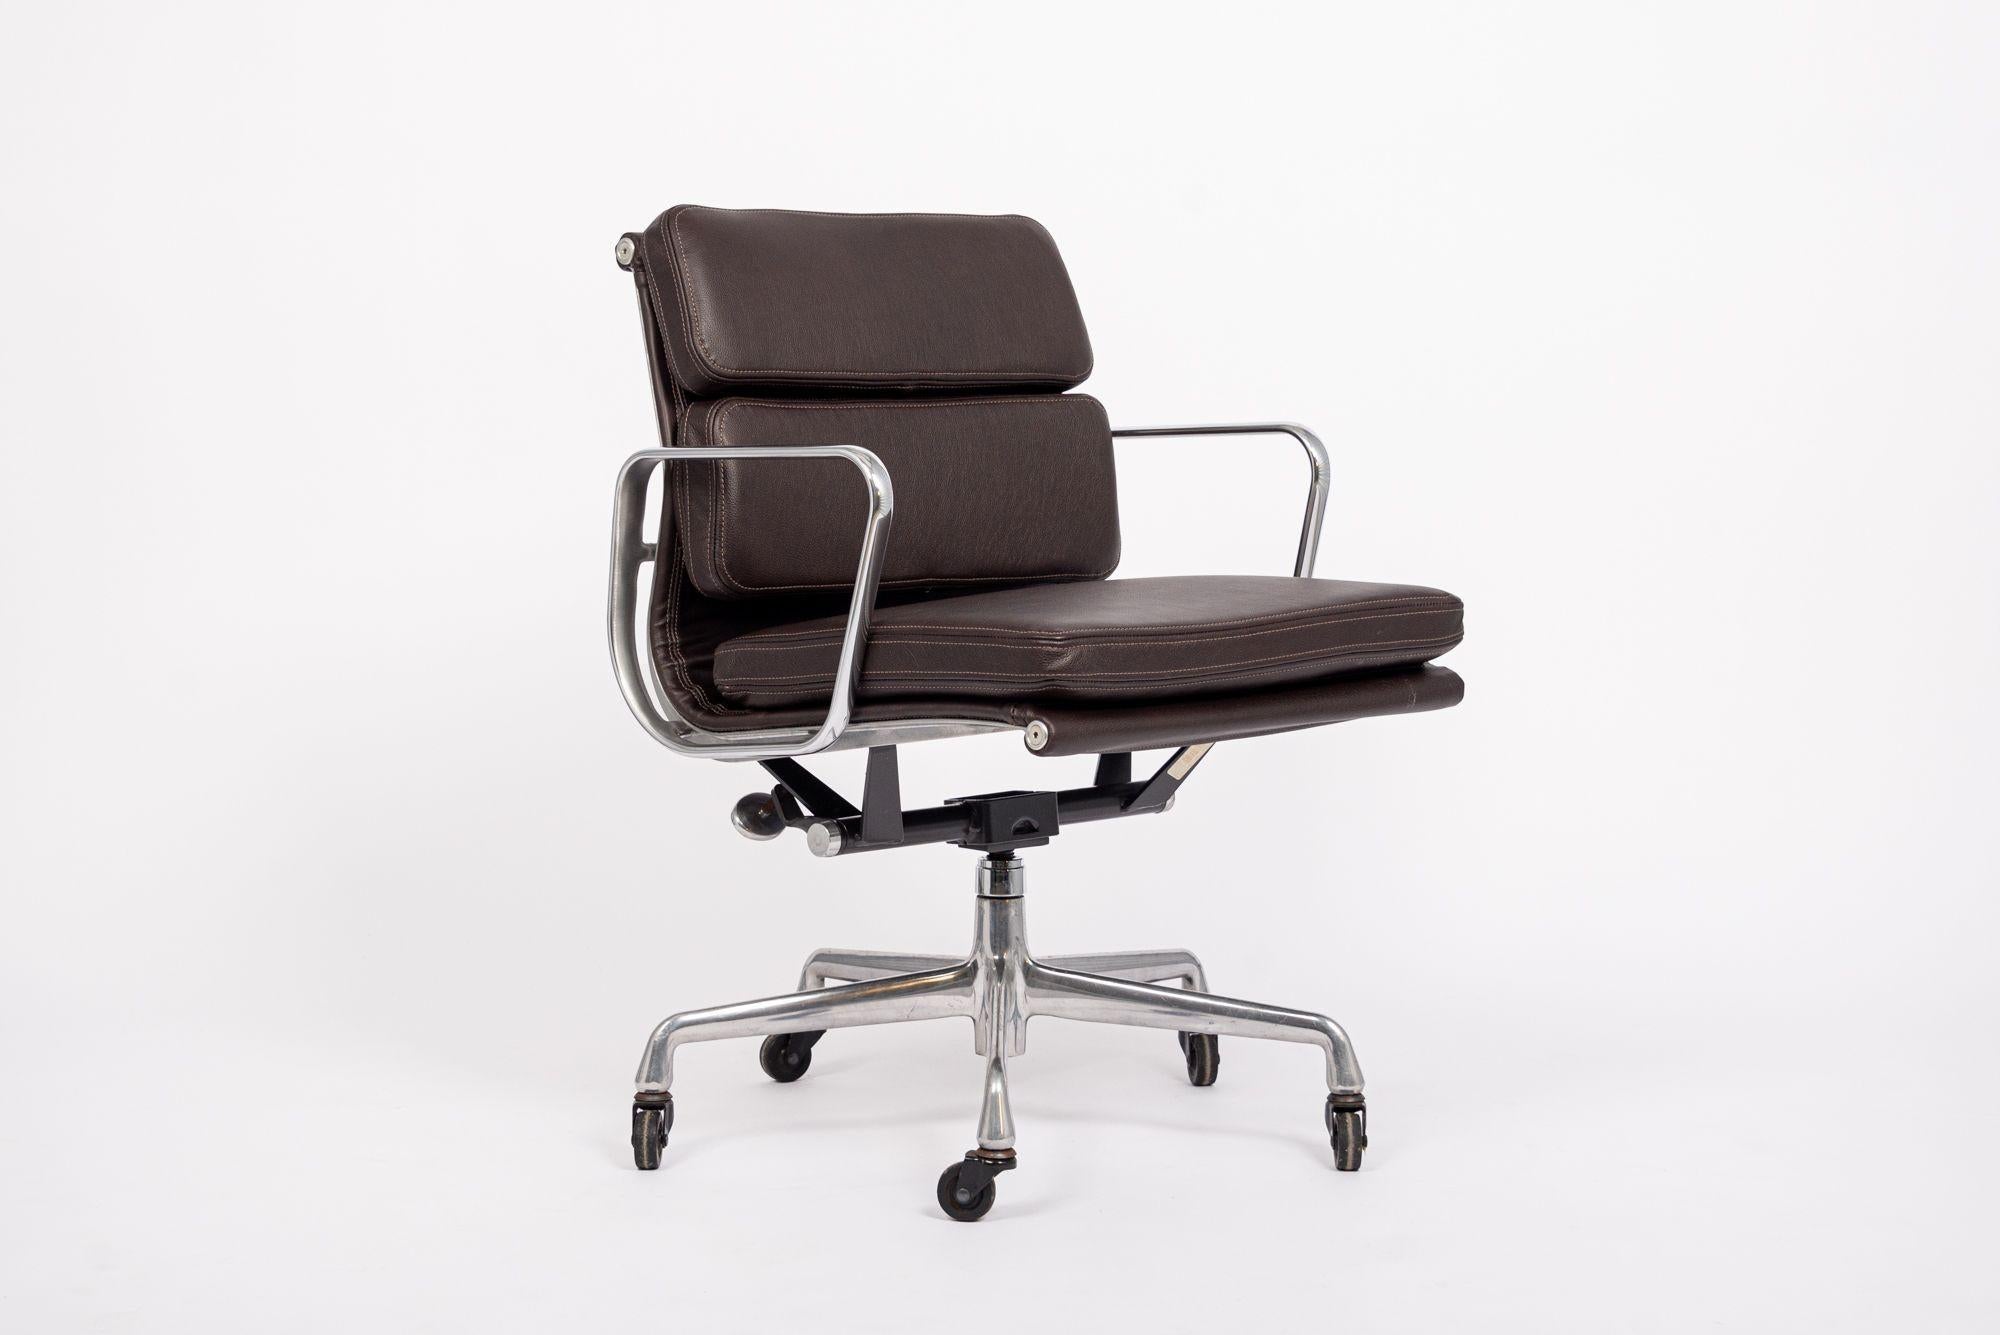 This authentic Eames for Herman Miller Soft Pad Management Height brown black leather office chair from the Aluminum Group Collection was manufactured in the 2000s. This classic mid century modern office chair was first introduced in 1969 by Charles